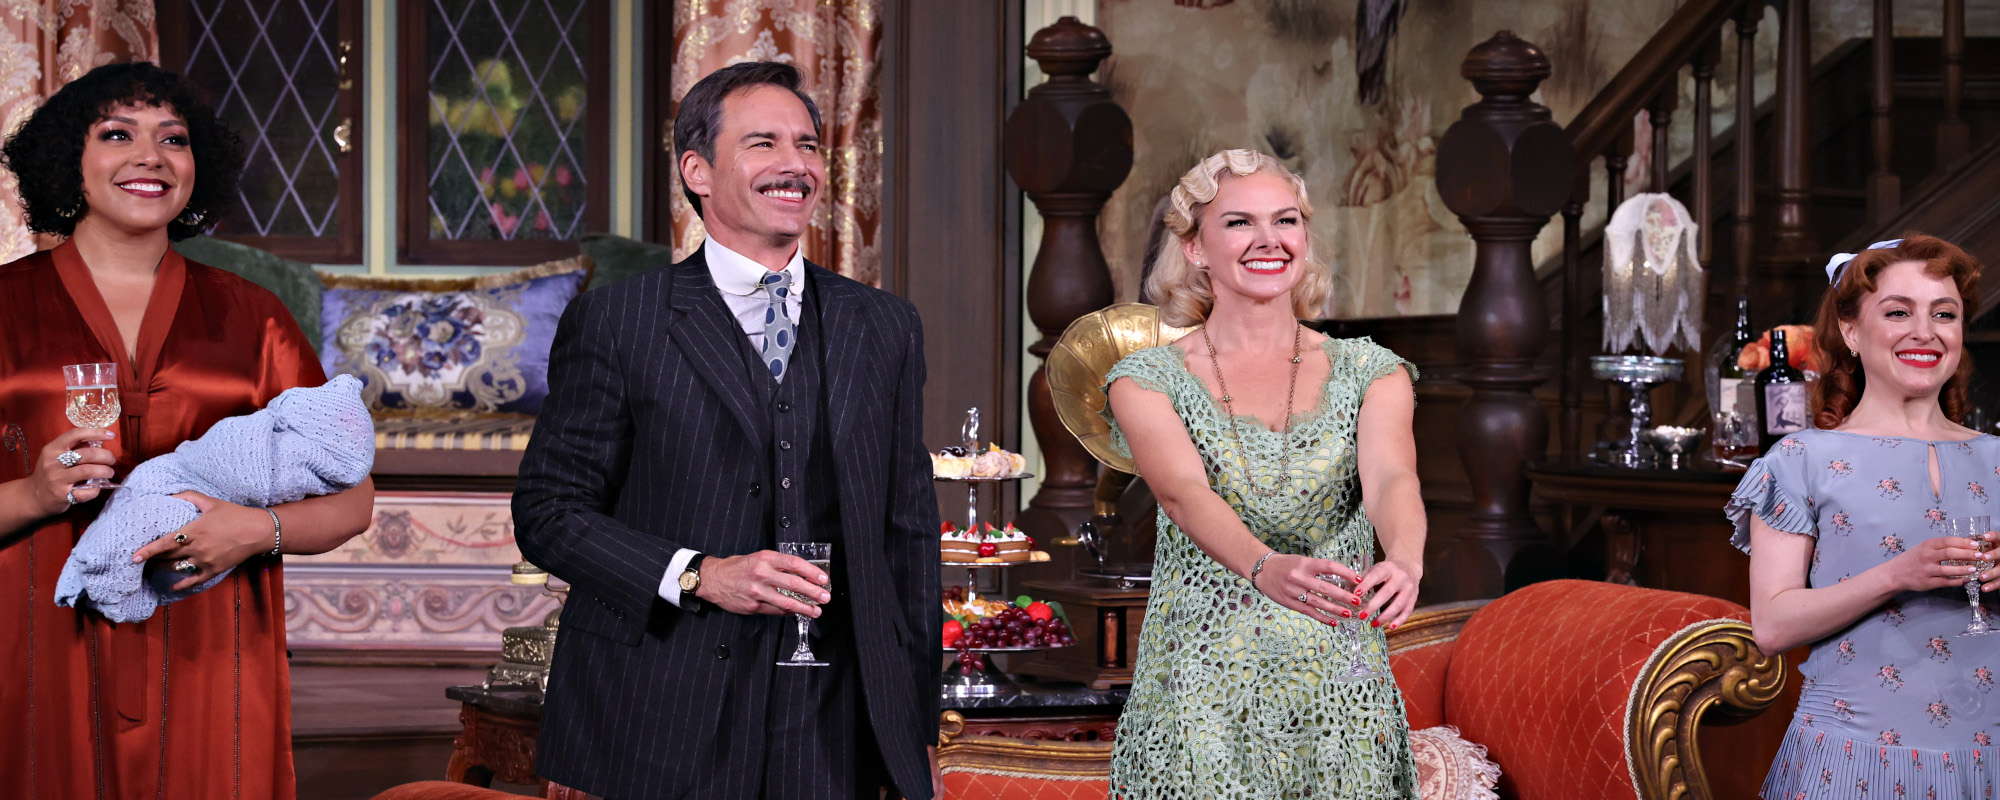 Laura Bell Bundy Returns to Broadway in ‘The Cottage’—“I Love to Keep an Audience Engaged”